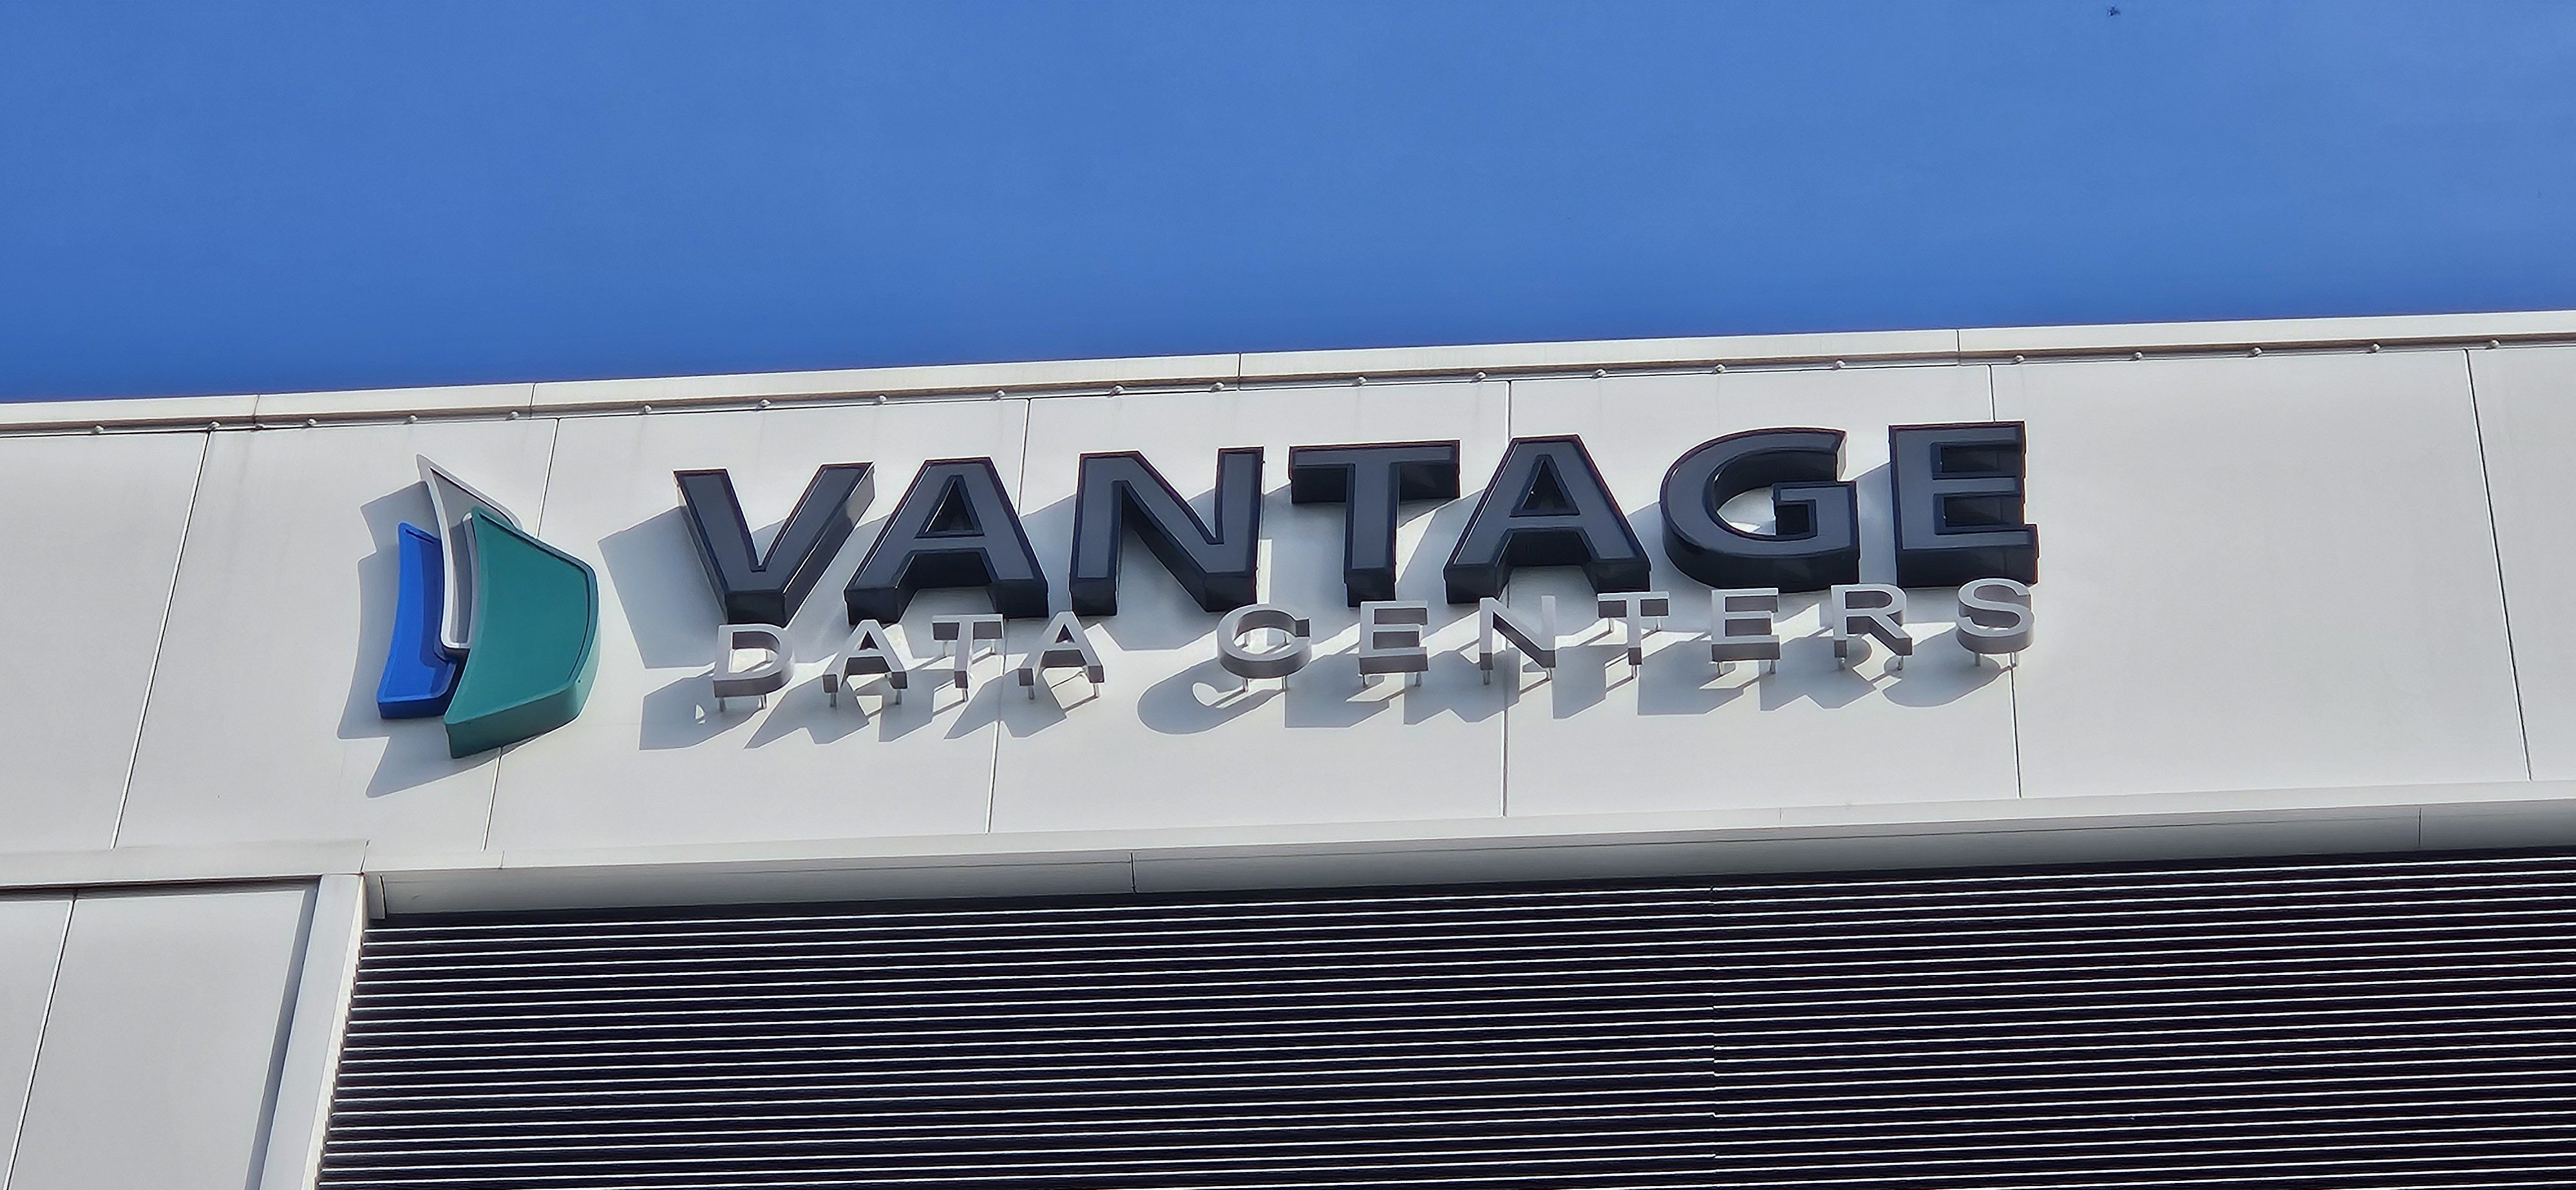 Vantage Data Centers company signs and wayfinding